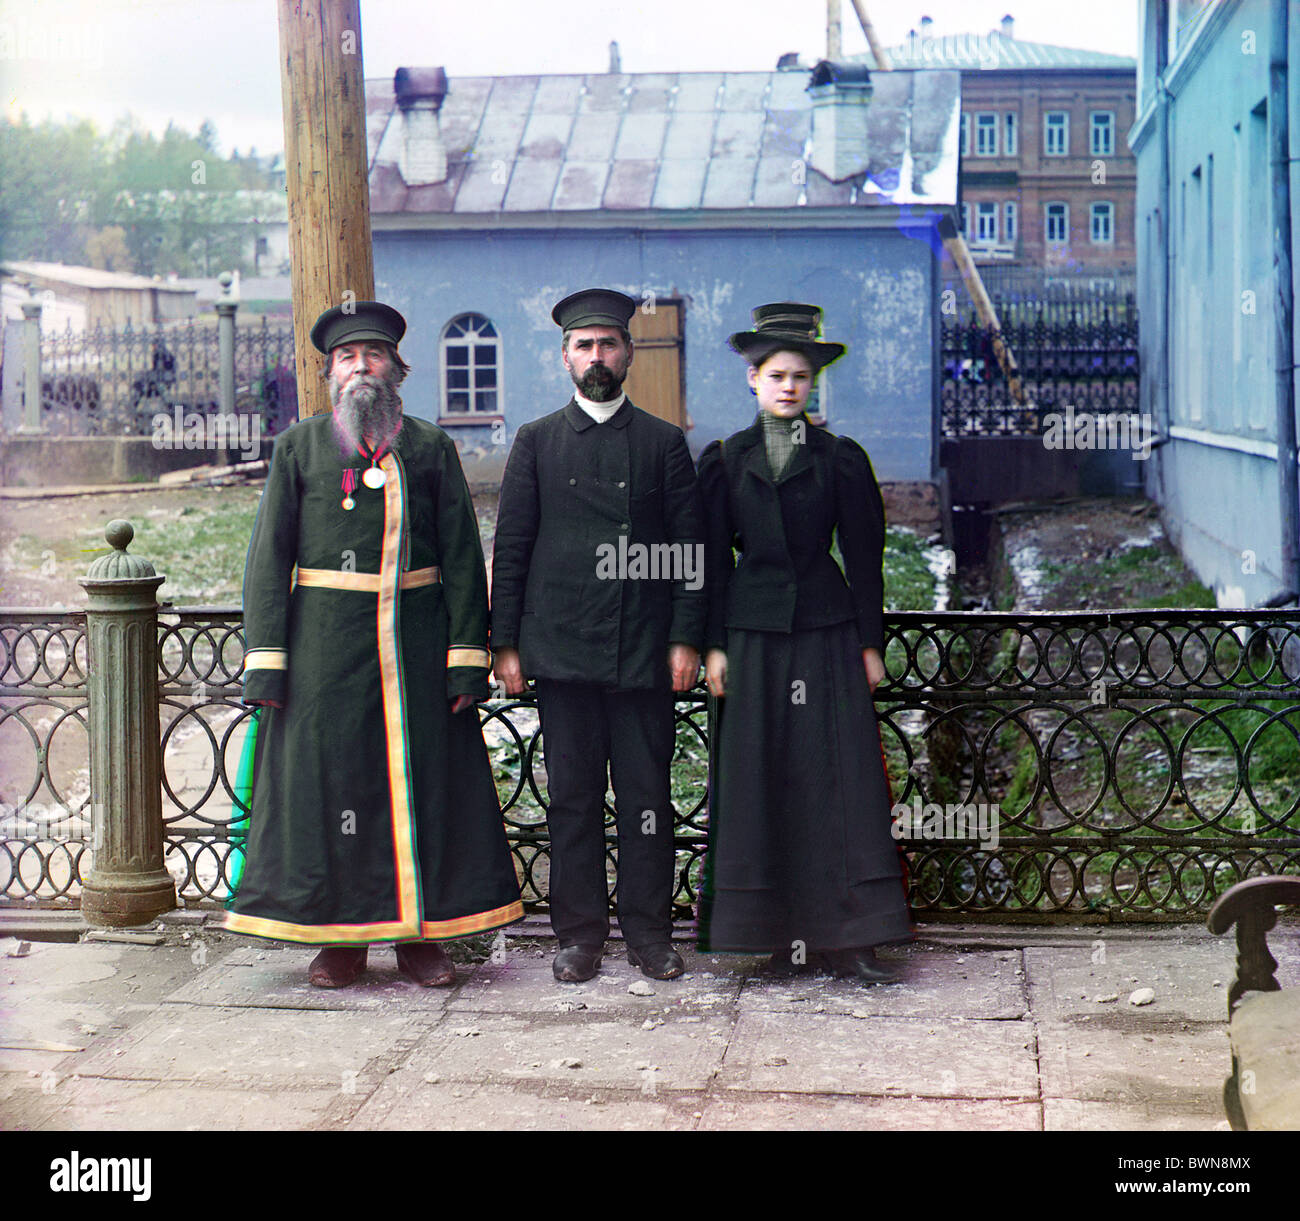 1910 Zlatoust arms plant Russian Empire Russia Sergey Mikhaylovich Prokudin-Gorsky 1863- 1944 history historic Stock Photo